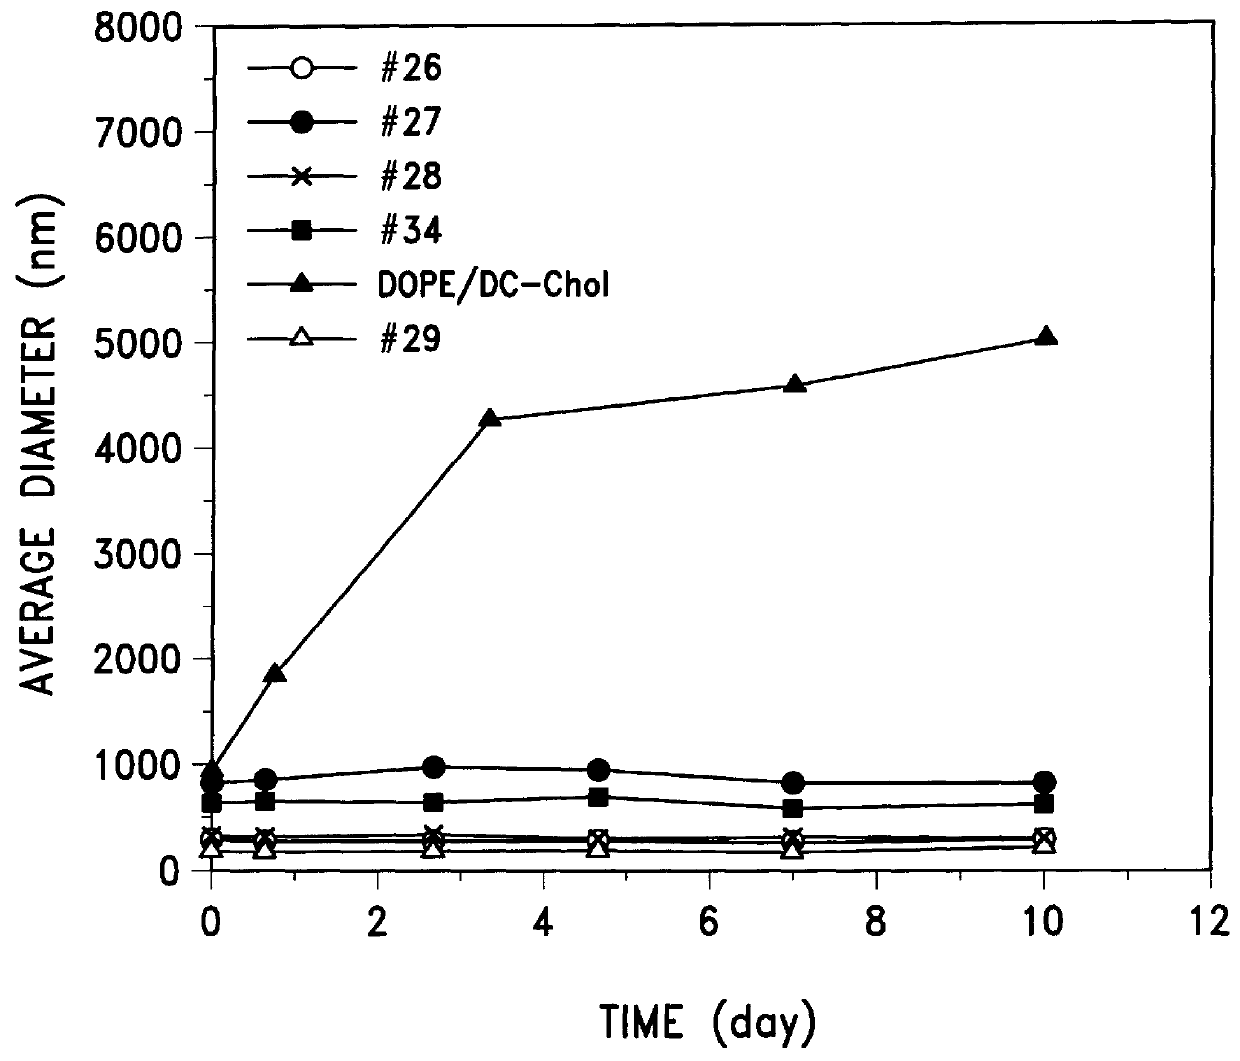 Emulsion and micellar formulations for the delivery of biologically active substances to cells